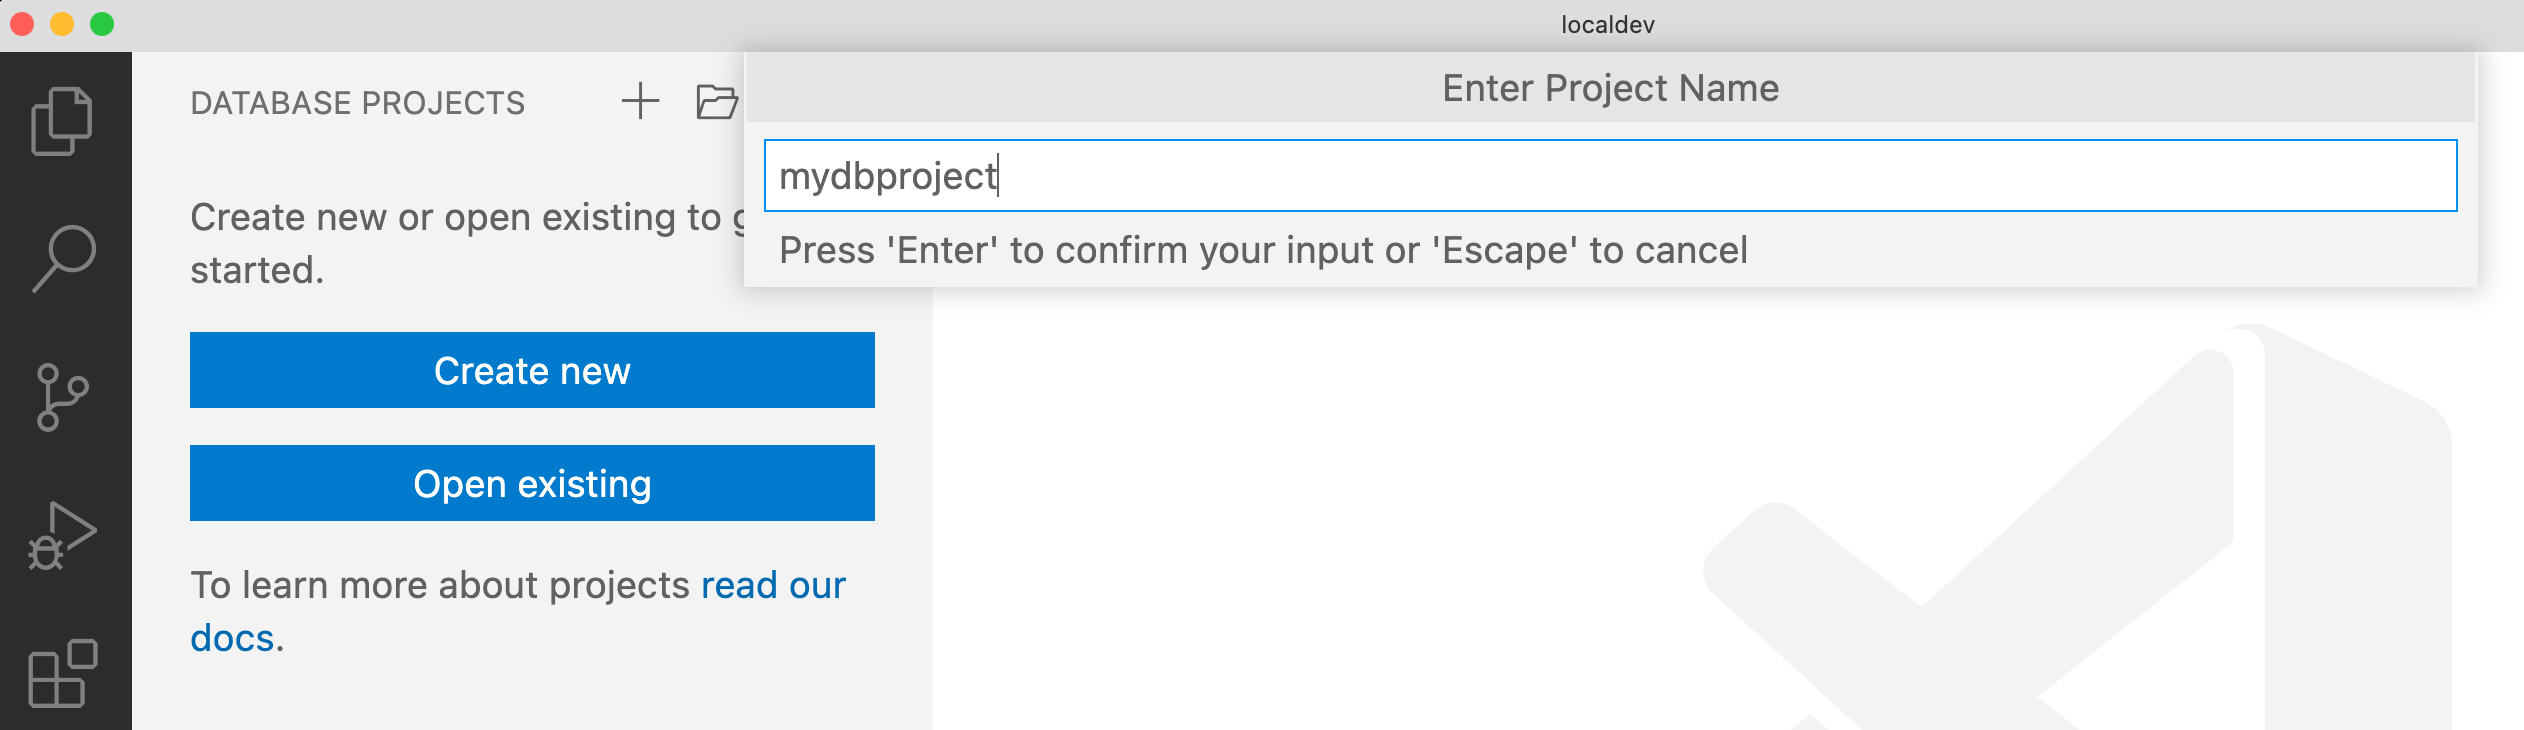 Screenshot of entering a name for a Database Project in Visual Studio Code.